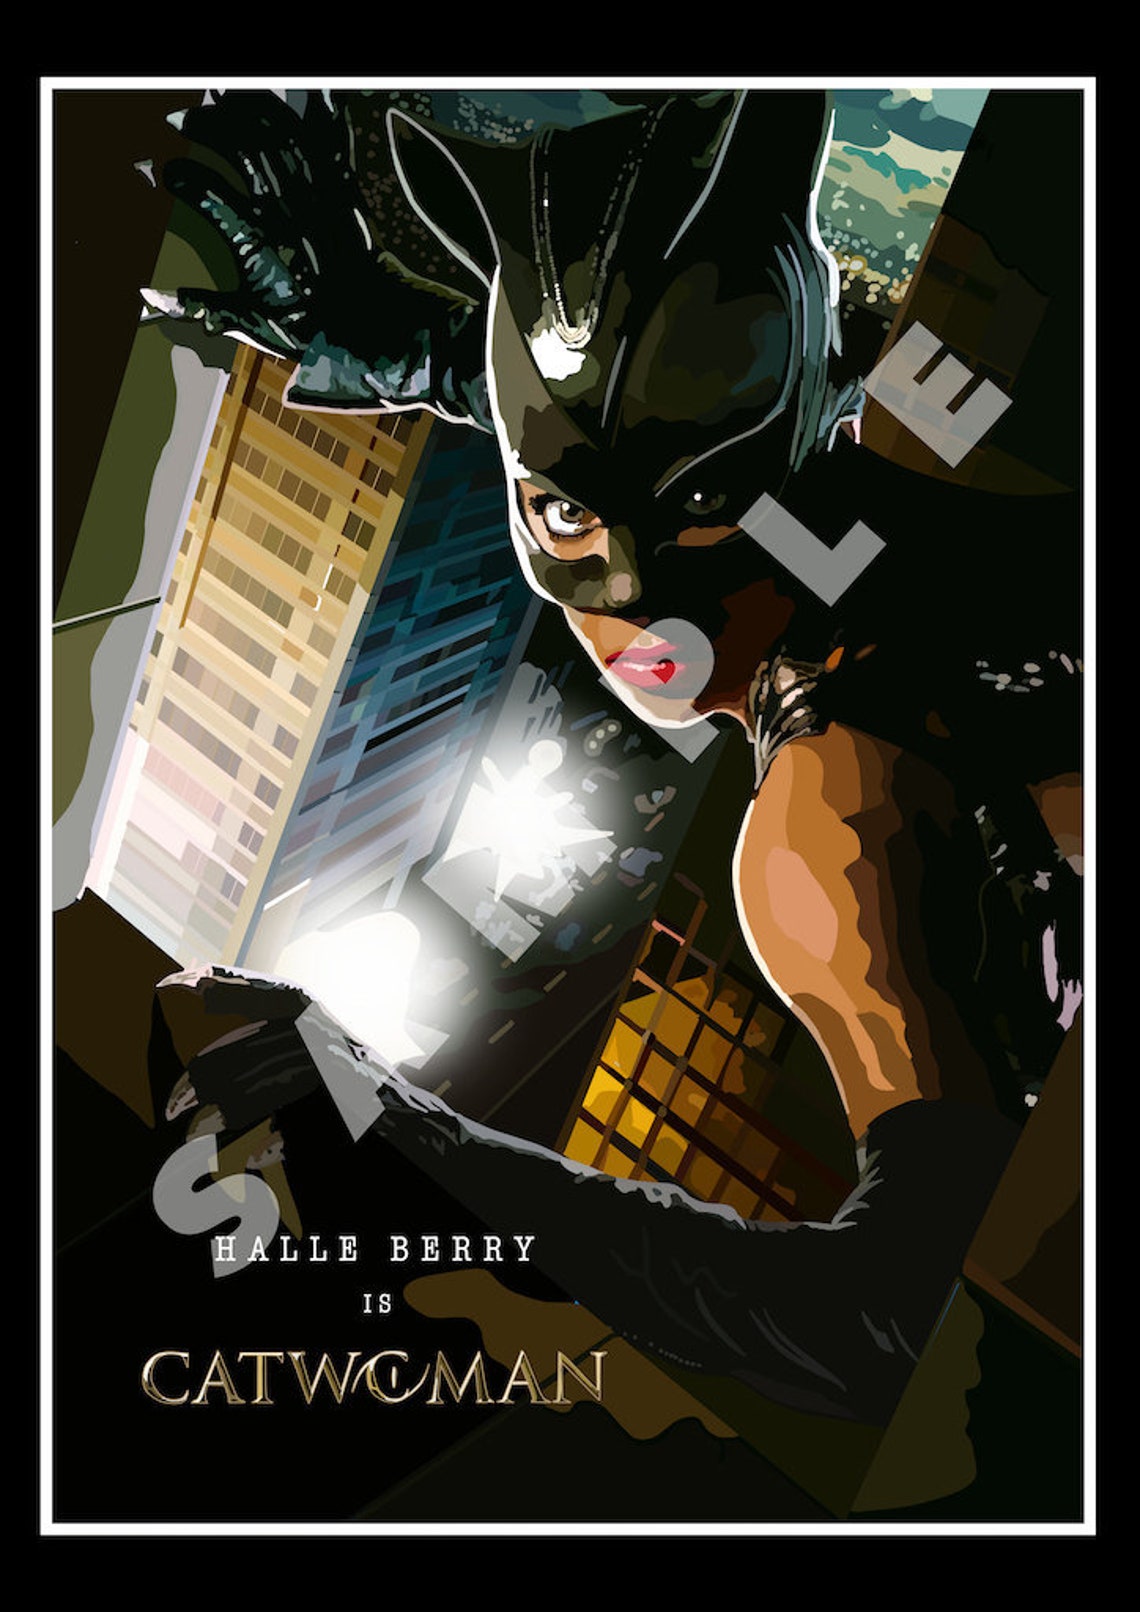 Catwoman 2004 Movie Poster Etsy